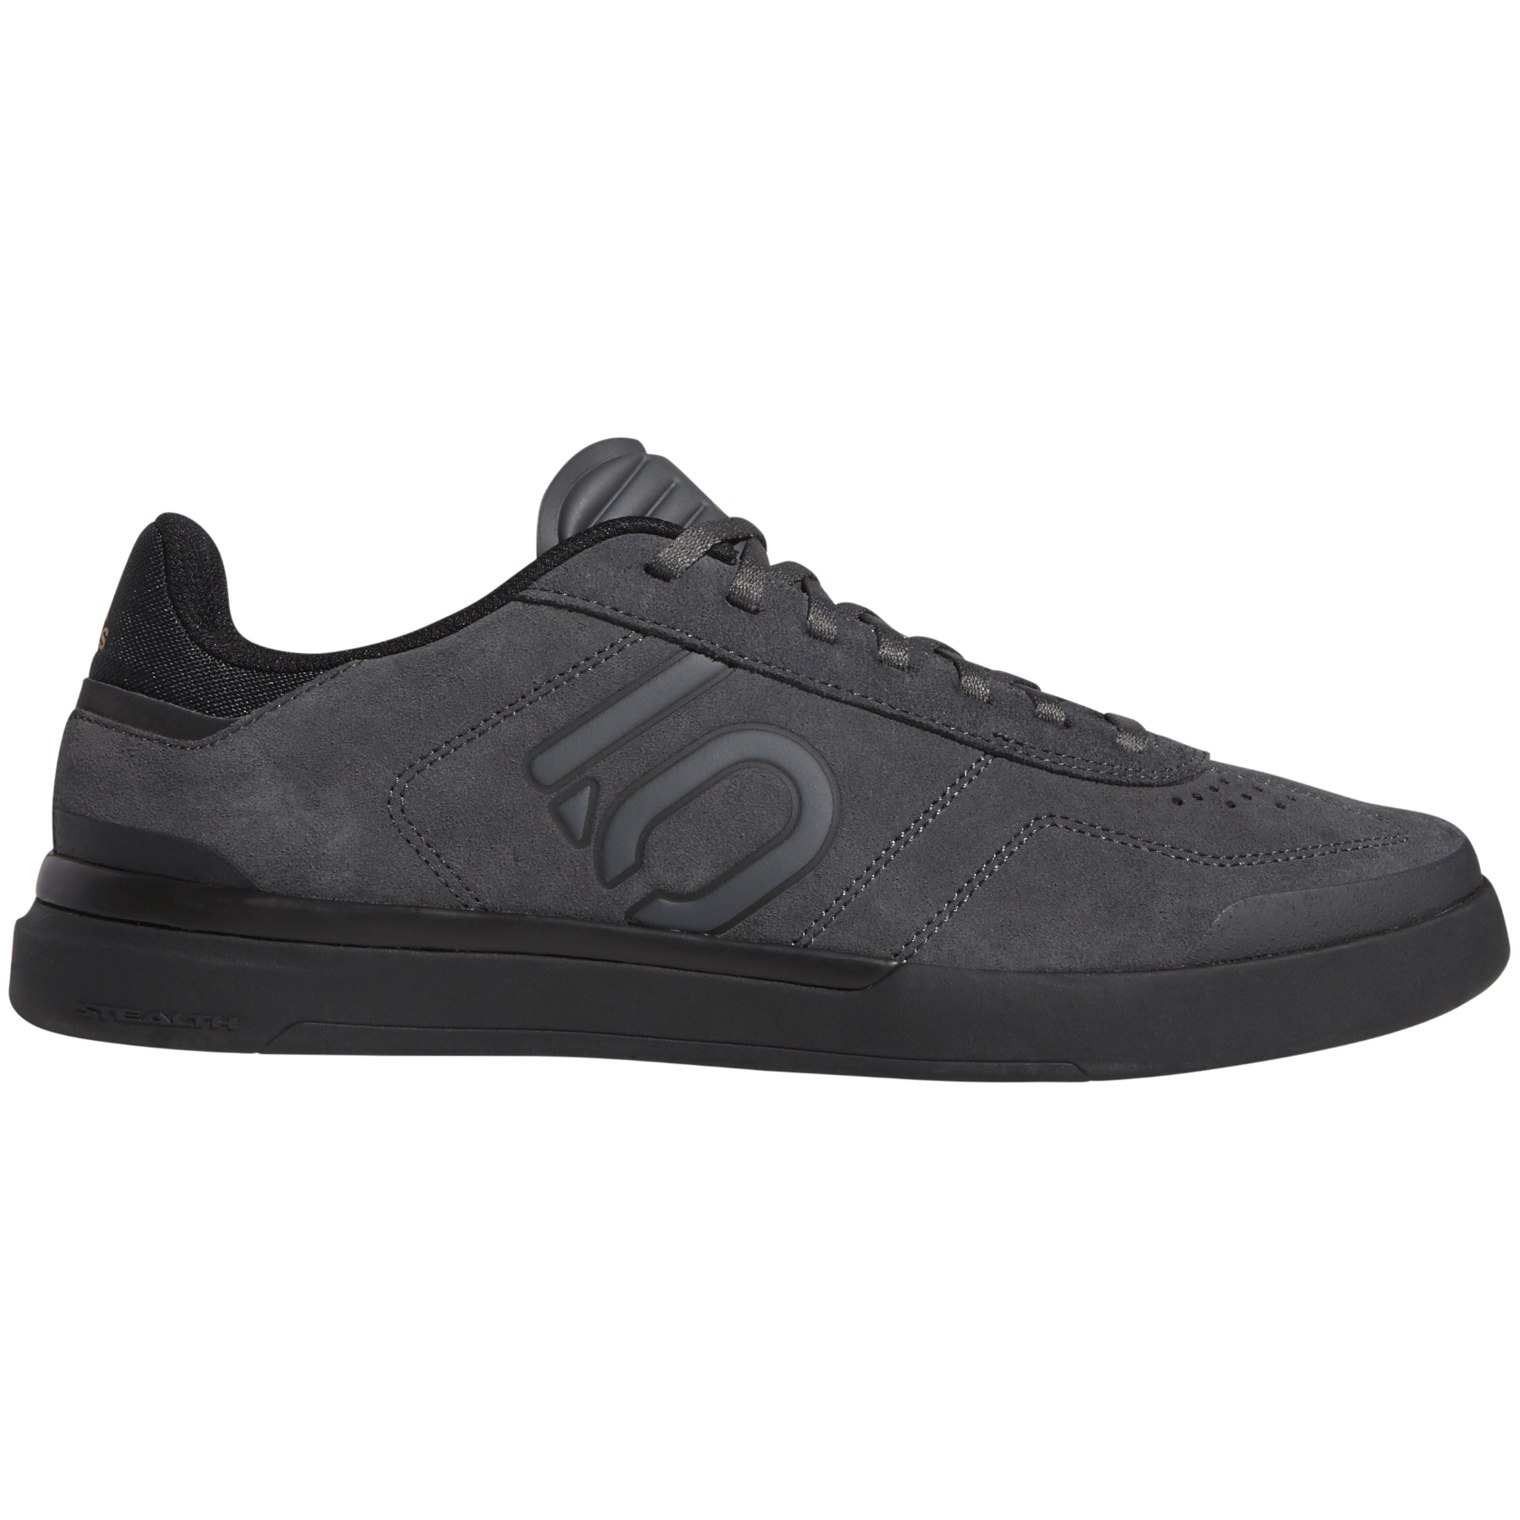 Picture of Five Ten Sleuth DLX Shoes - Grey Six / Core Black / Matte Gold